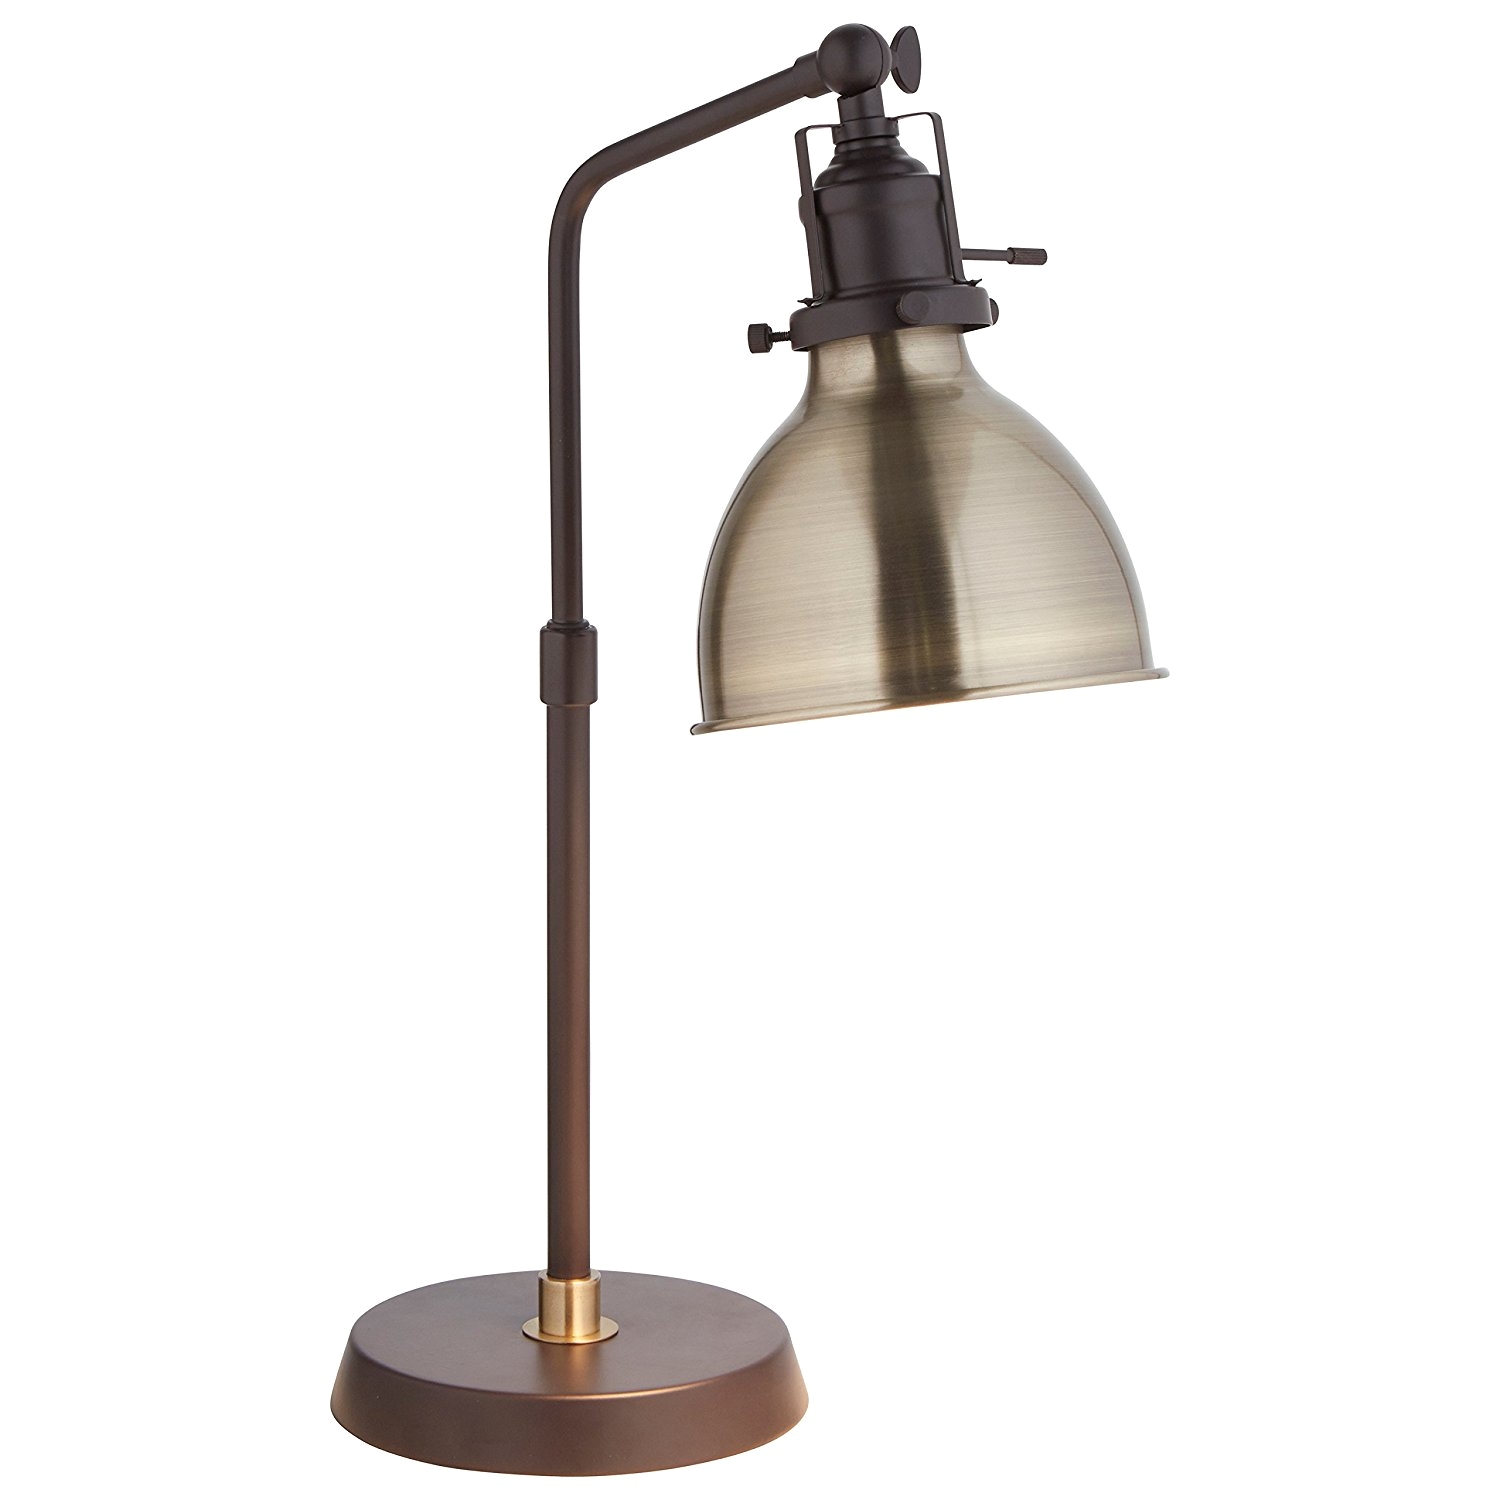 rivet pike factory industrial table lamp 18h with bulb black and brass shade amazon com